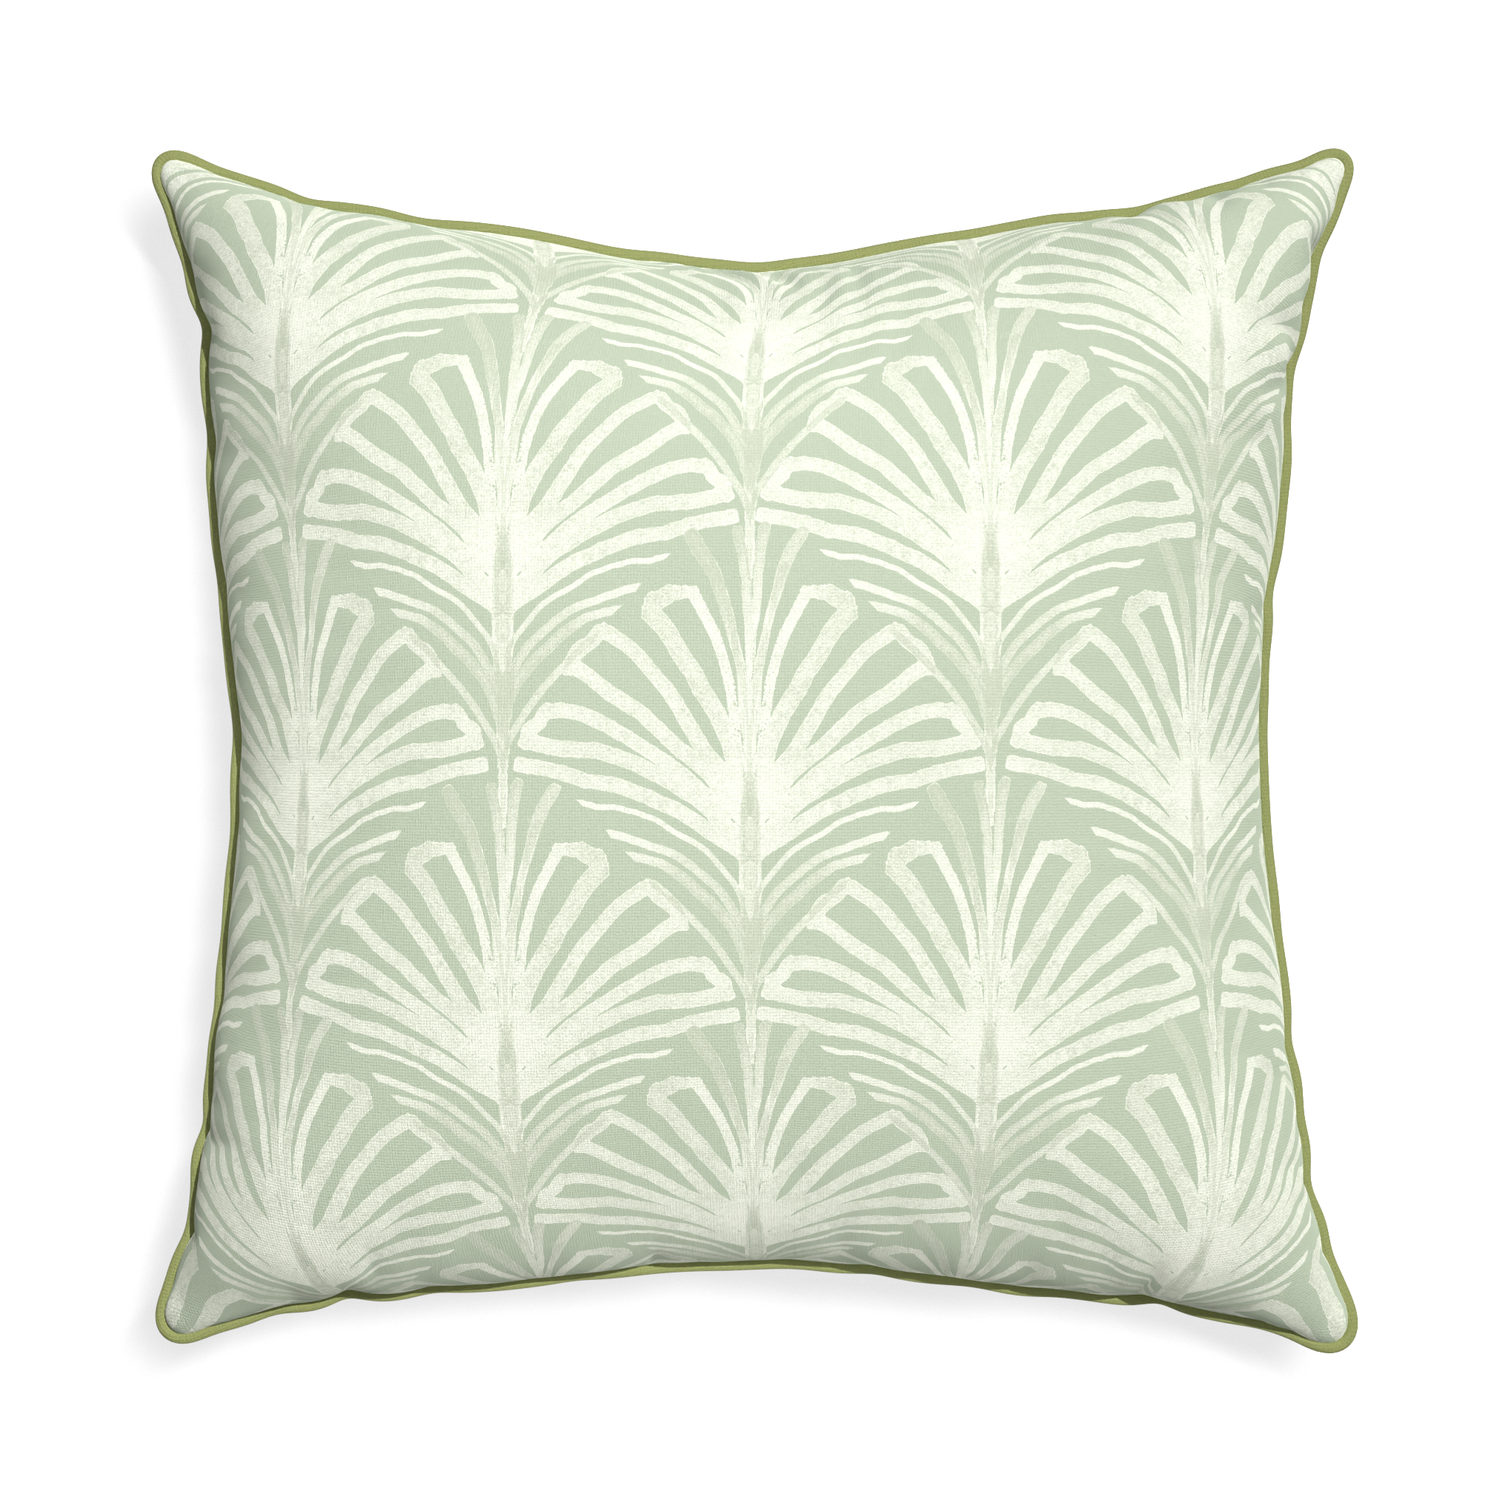 Euro-sham suzy sage custom sage green palmpillow with moss piping on white background